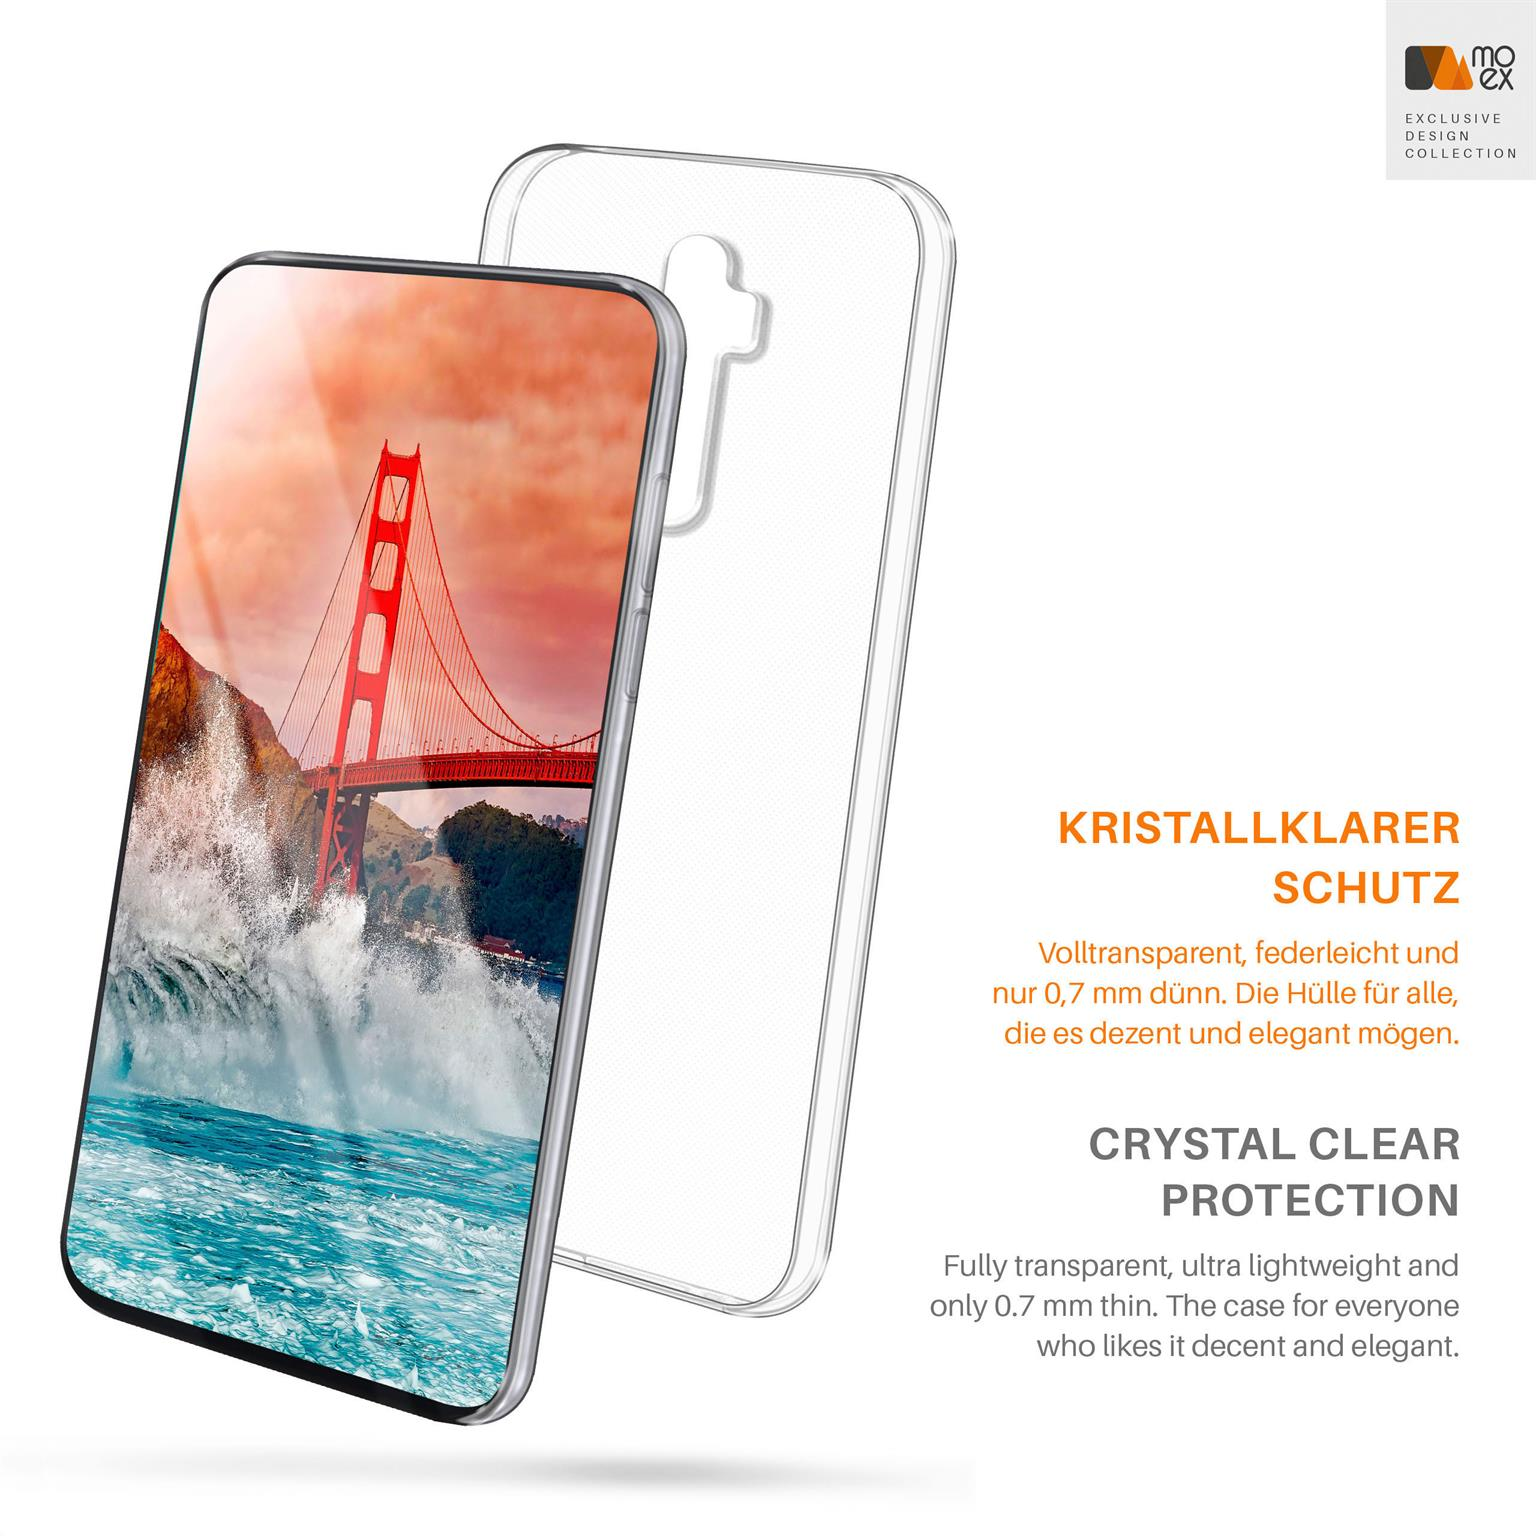 MOEX Aero Case, Backcover, Oppo, Crystal-Clear Reno2